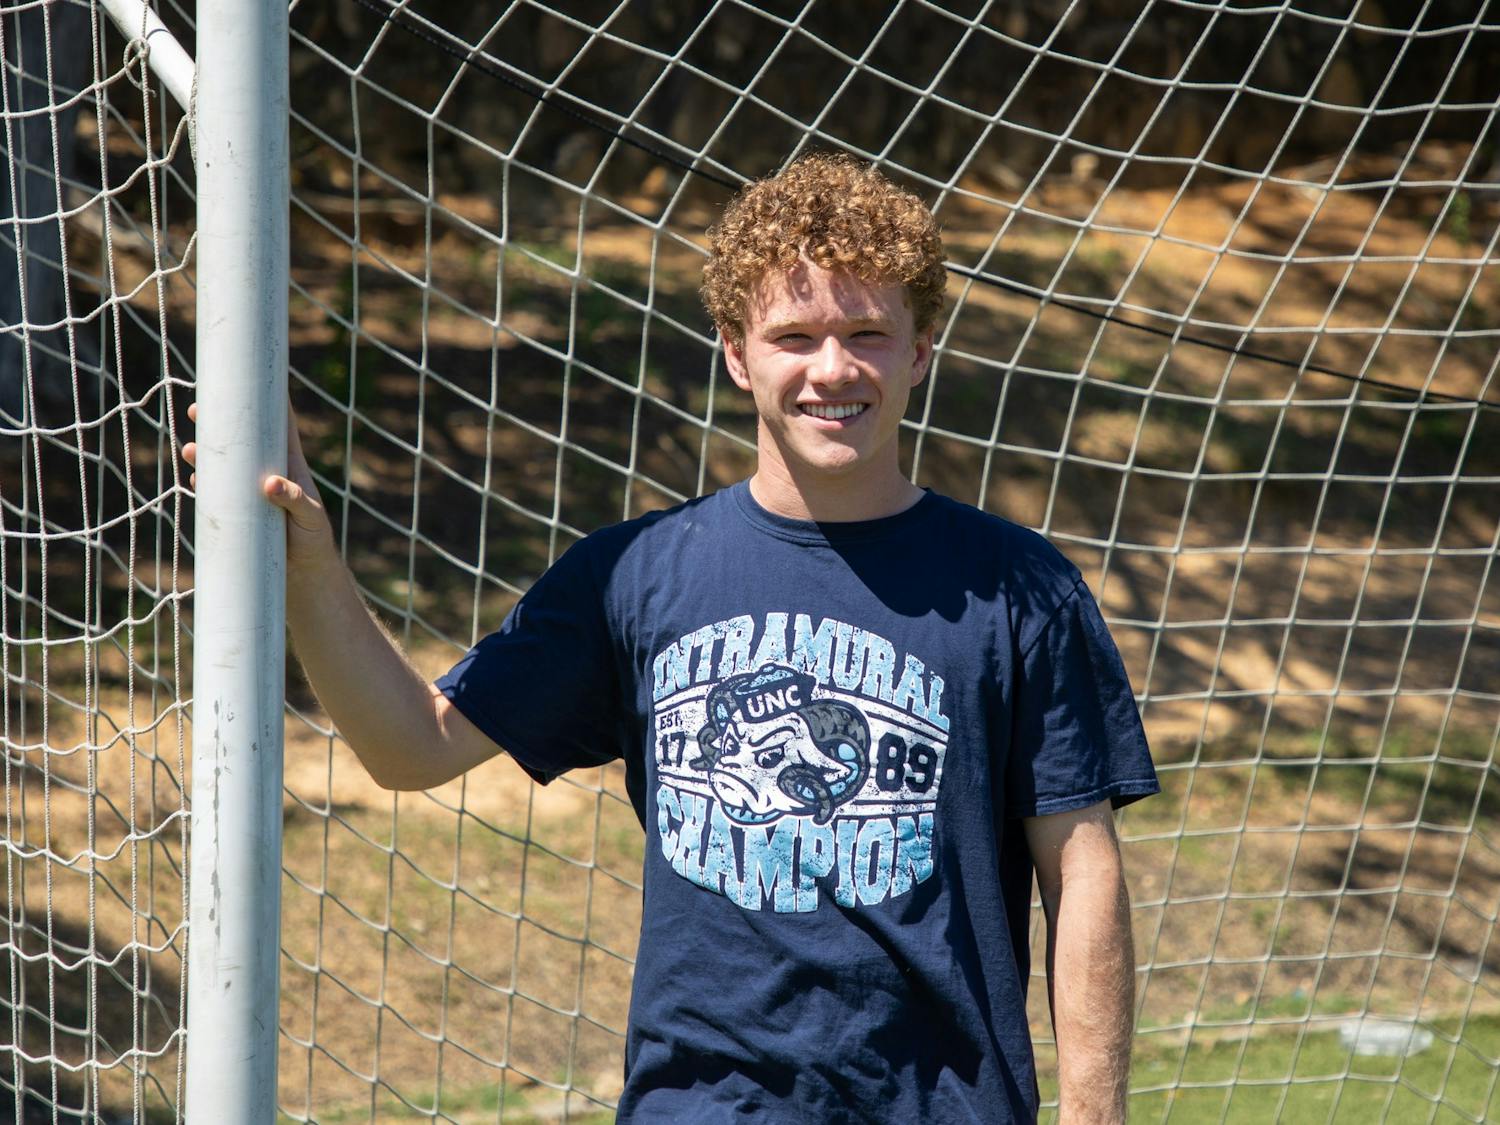 Andrew Zadrozny, a rising junior studying computer science, poses for a portrait in his intramural soccer championship t-shirt at Hooker Fields on Saturday, June 18, 2022.